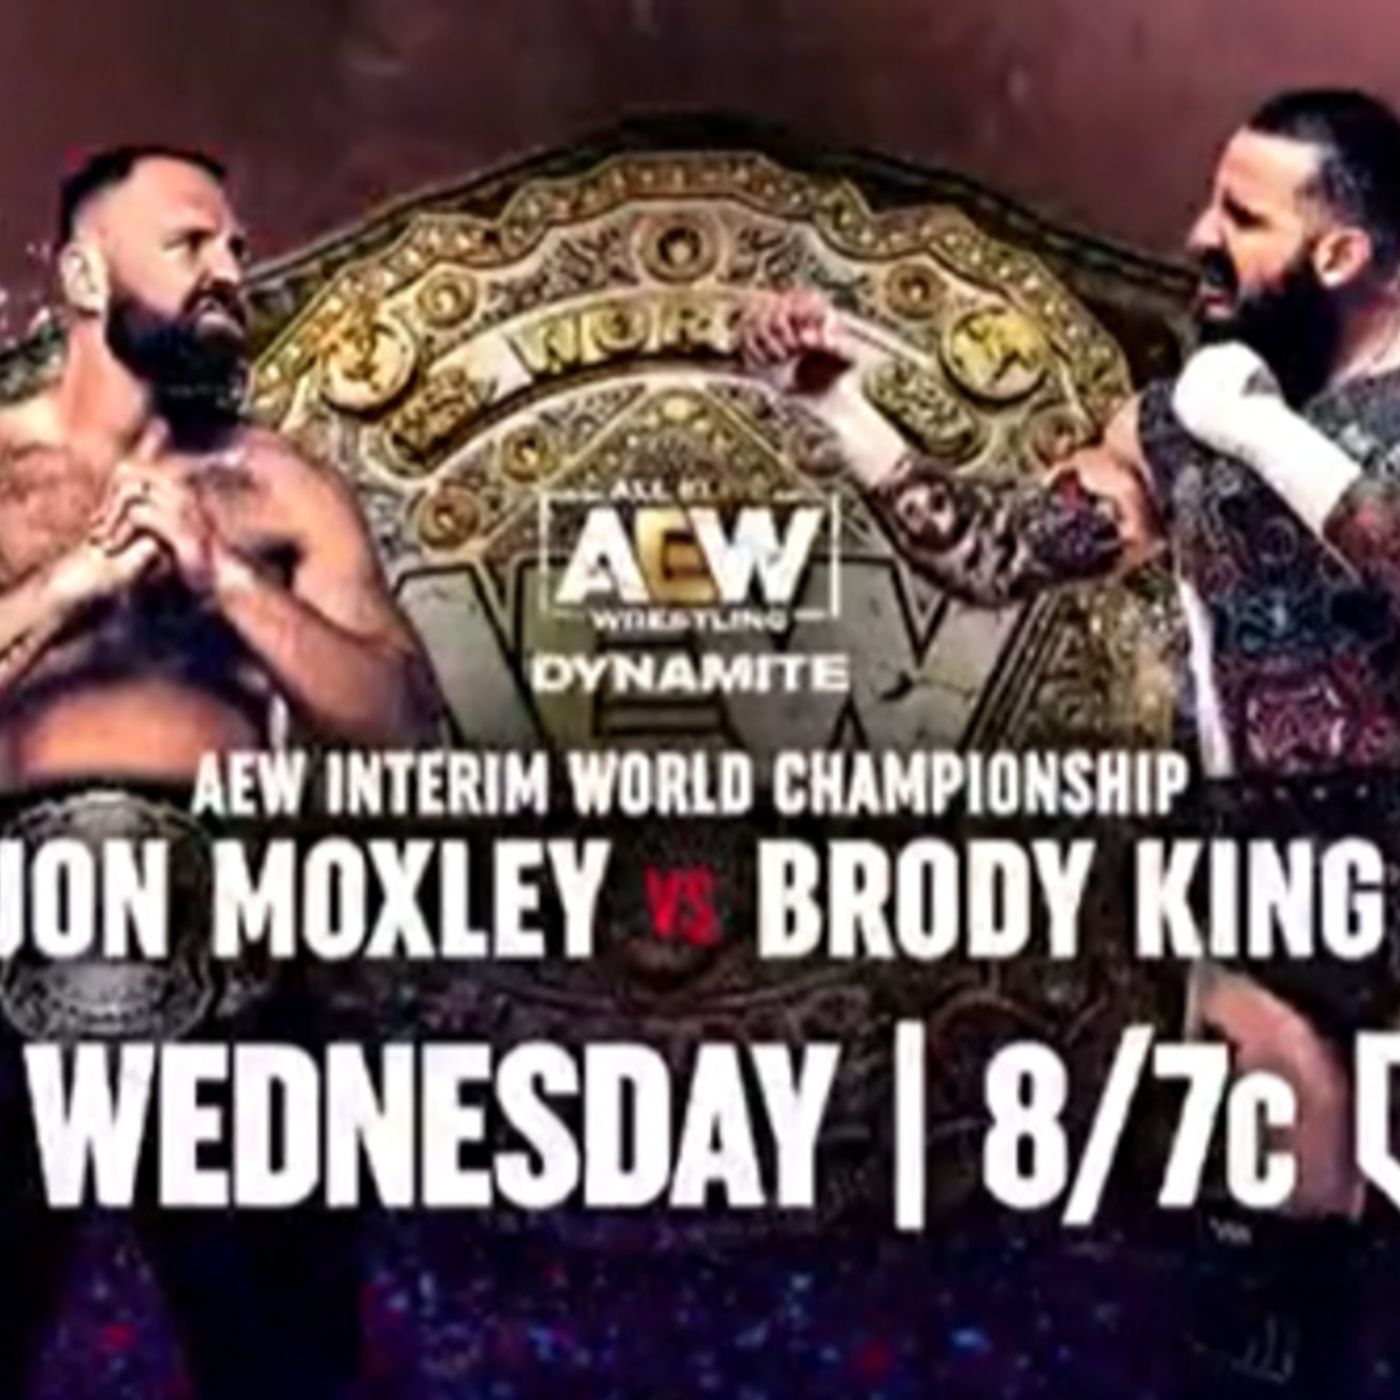 Bryan & Vinny Show: AEW Dynamite with Moxley vs. Brody and NXT 2.0 Great American Bash!